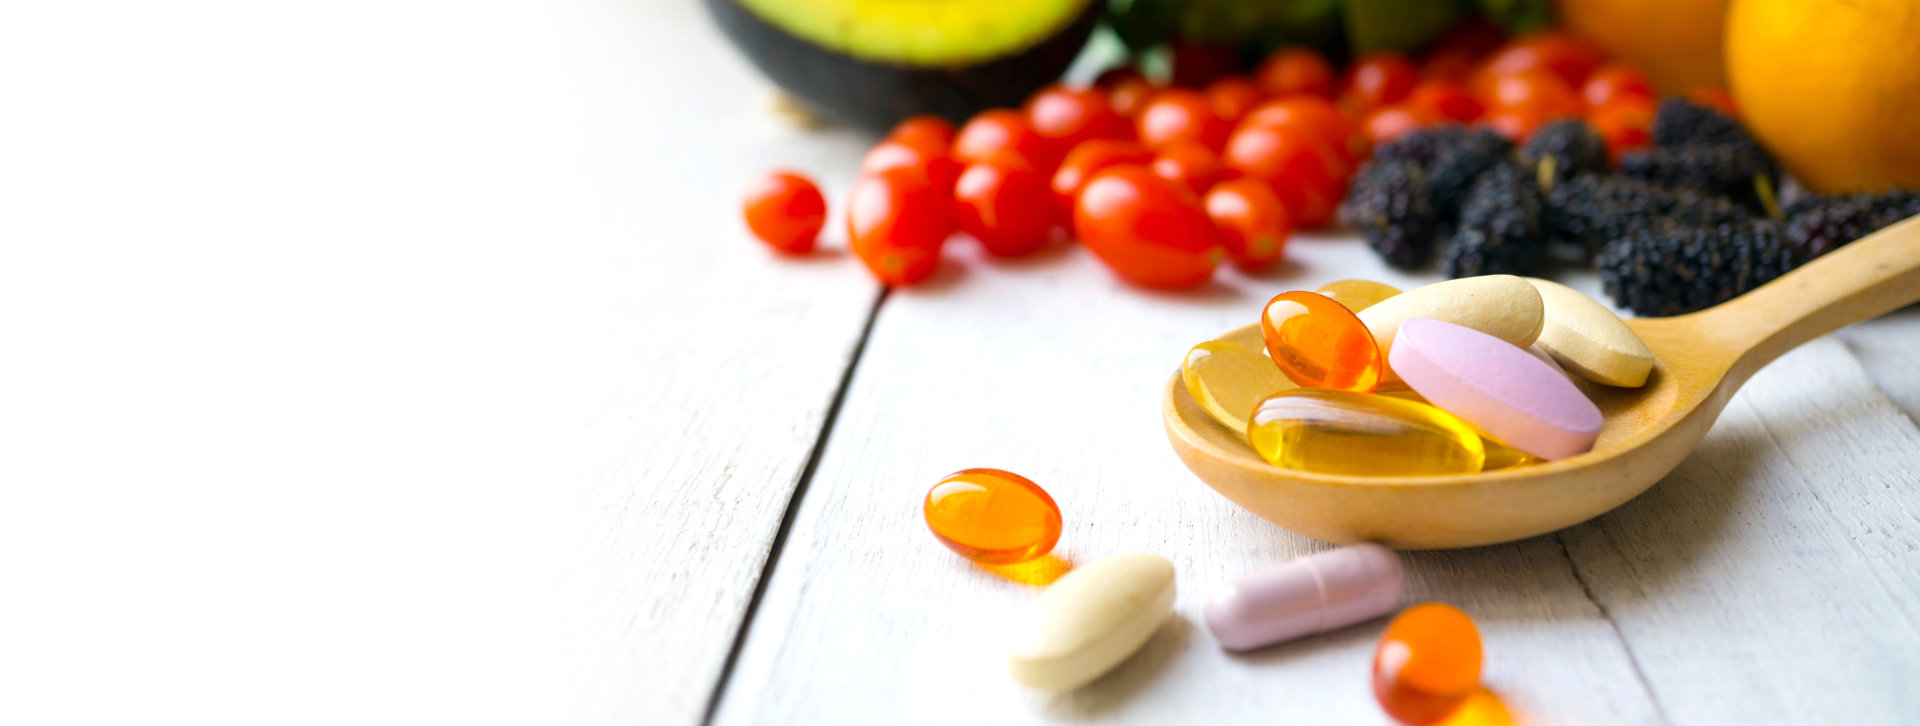 multivitamins and supplement from fruits 